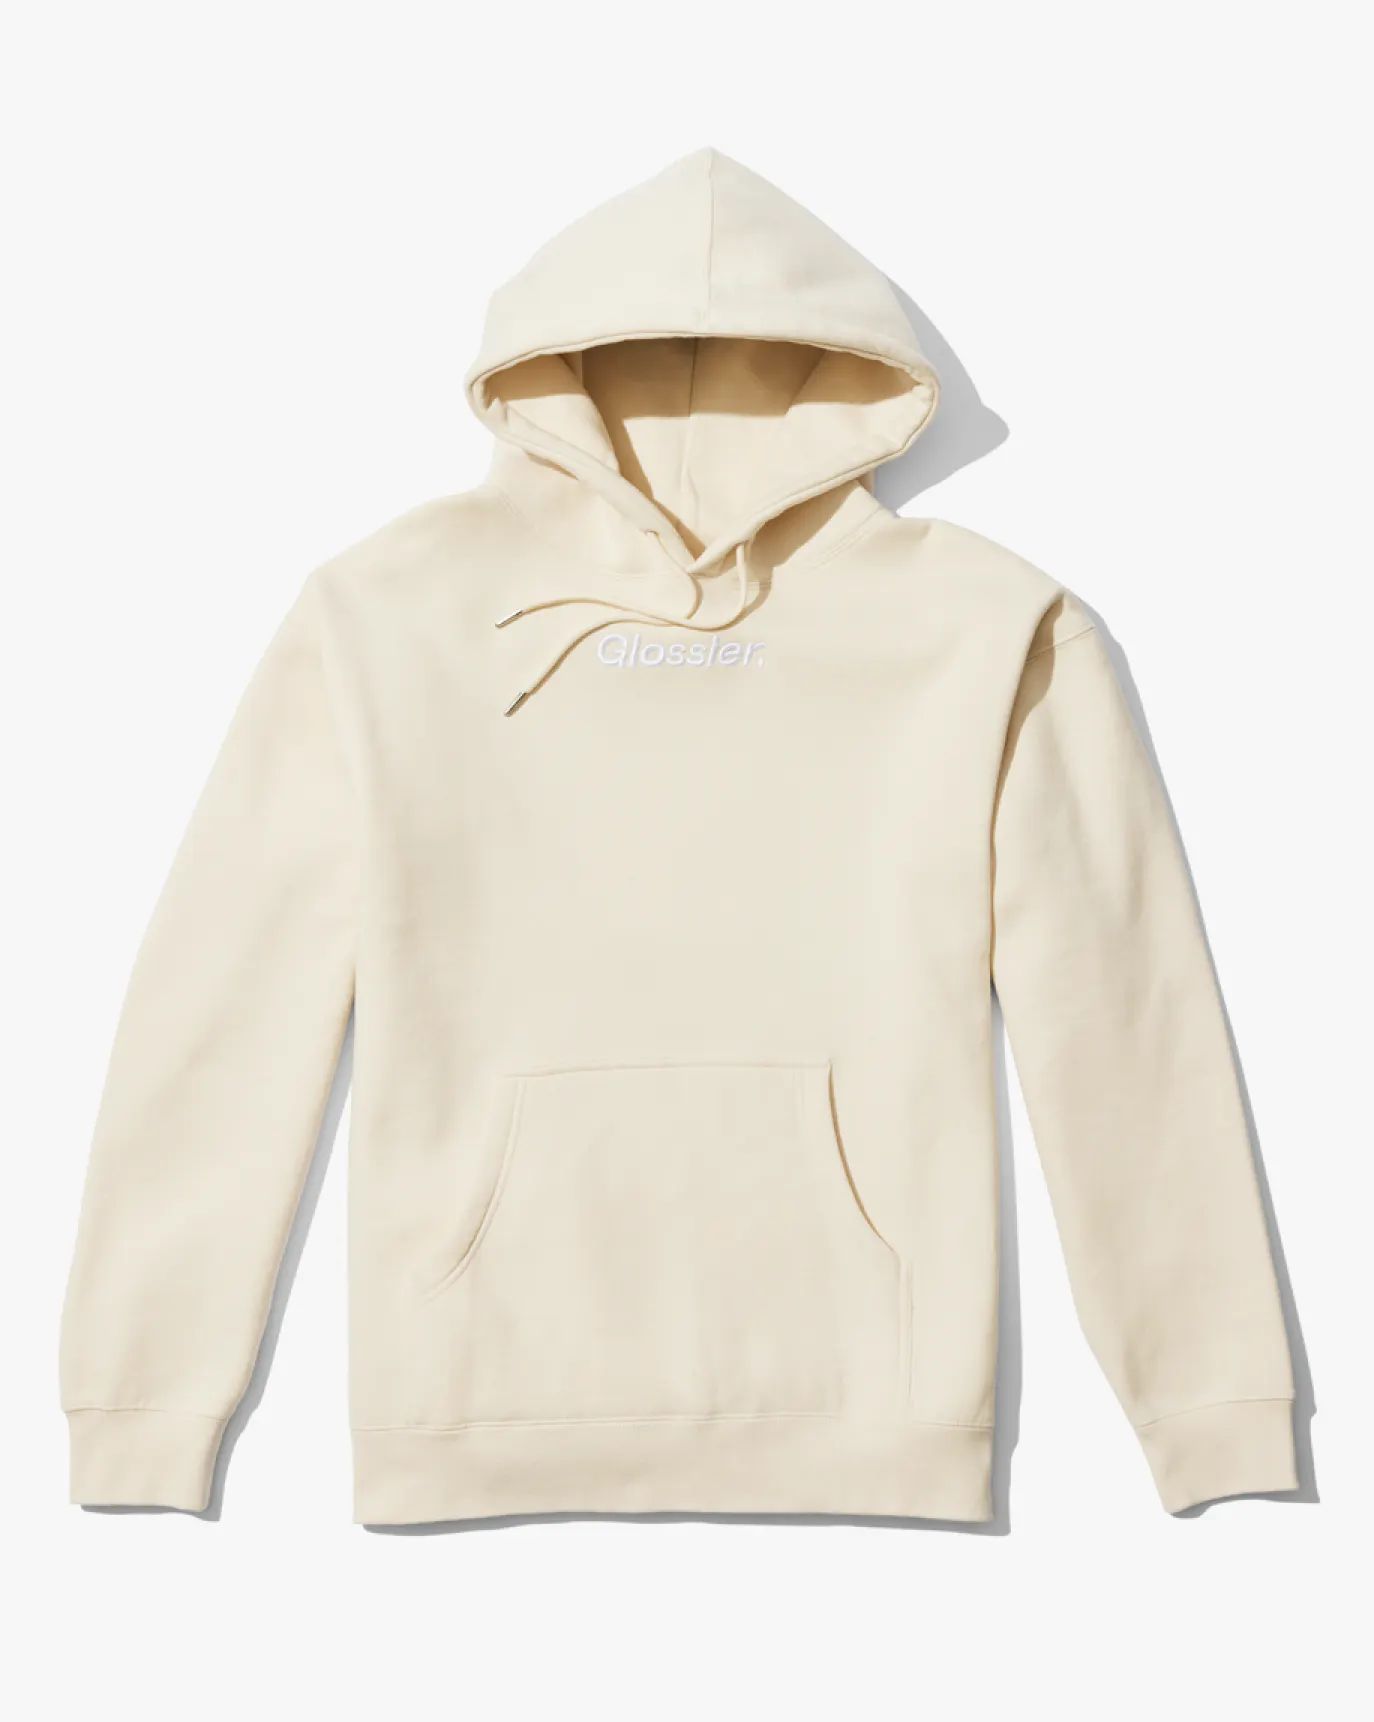 Limited Edition Embroidered Cream Hoodie | Glossier